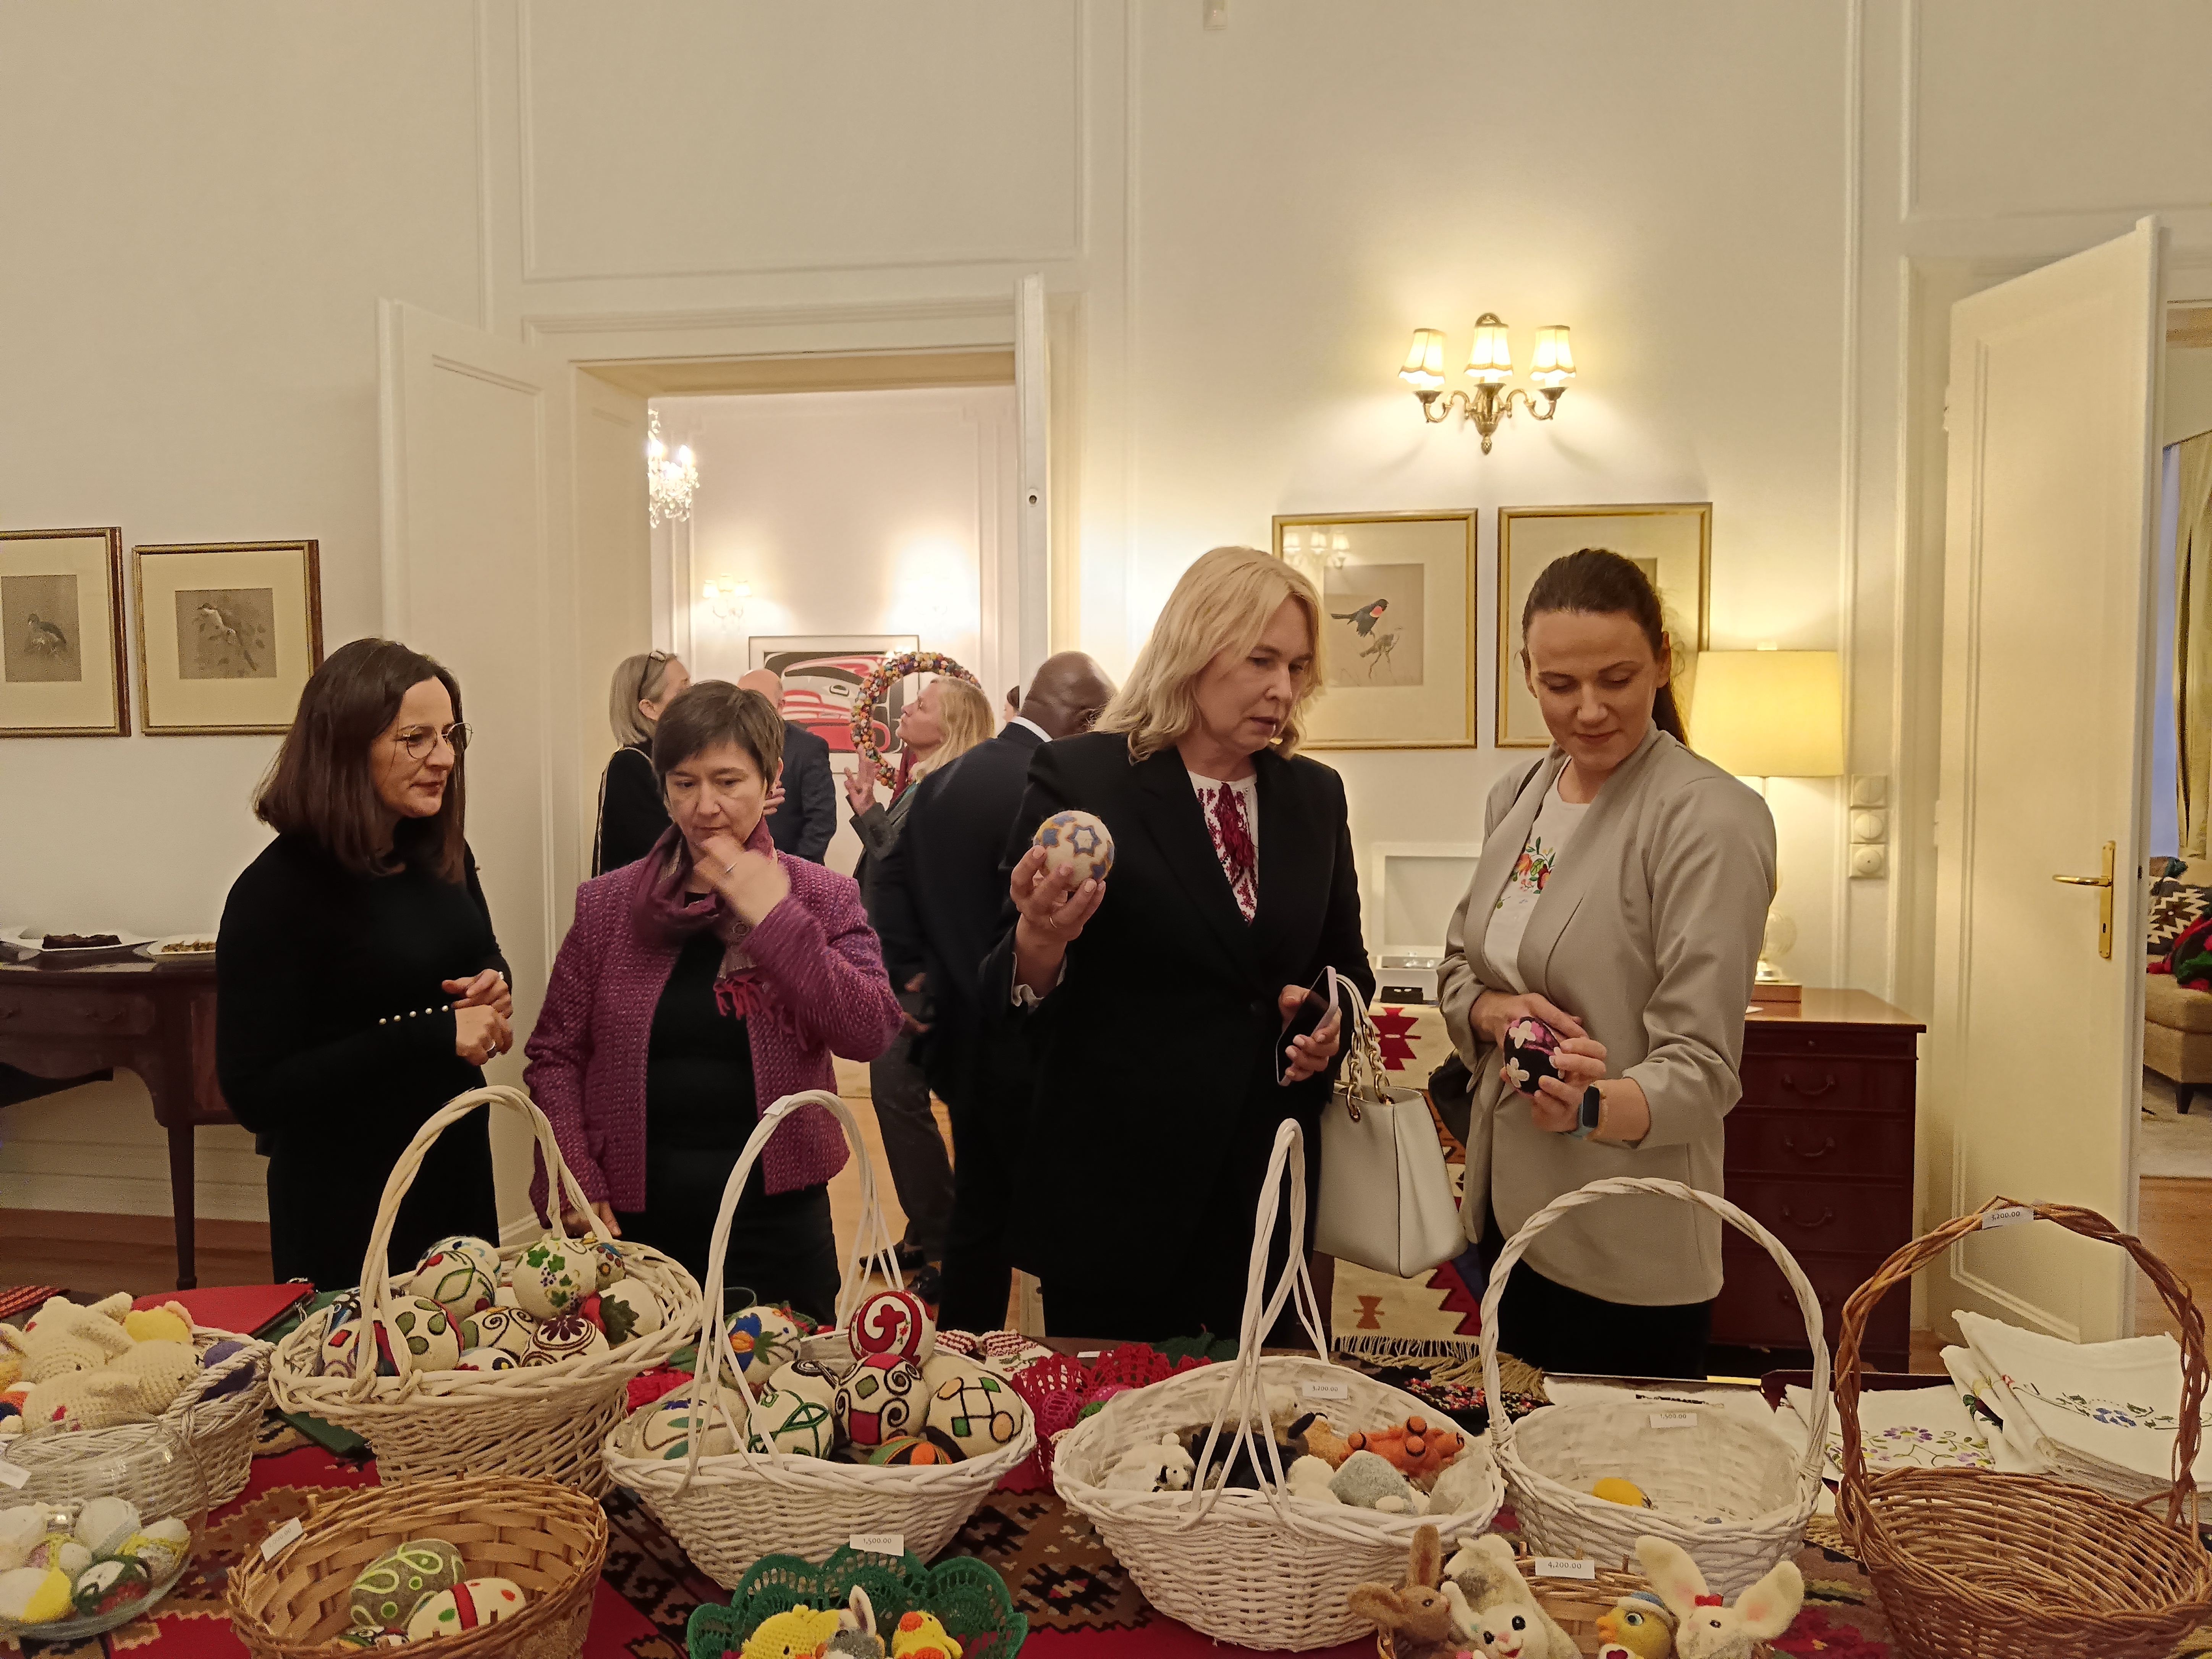 Easter bazaar at the Canadian residence